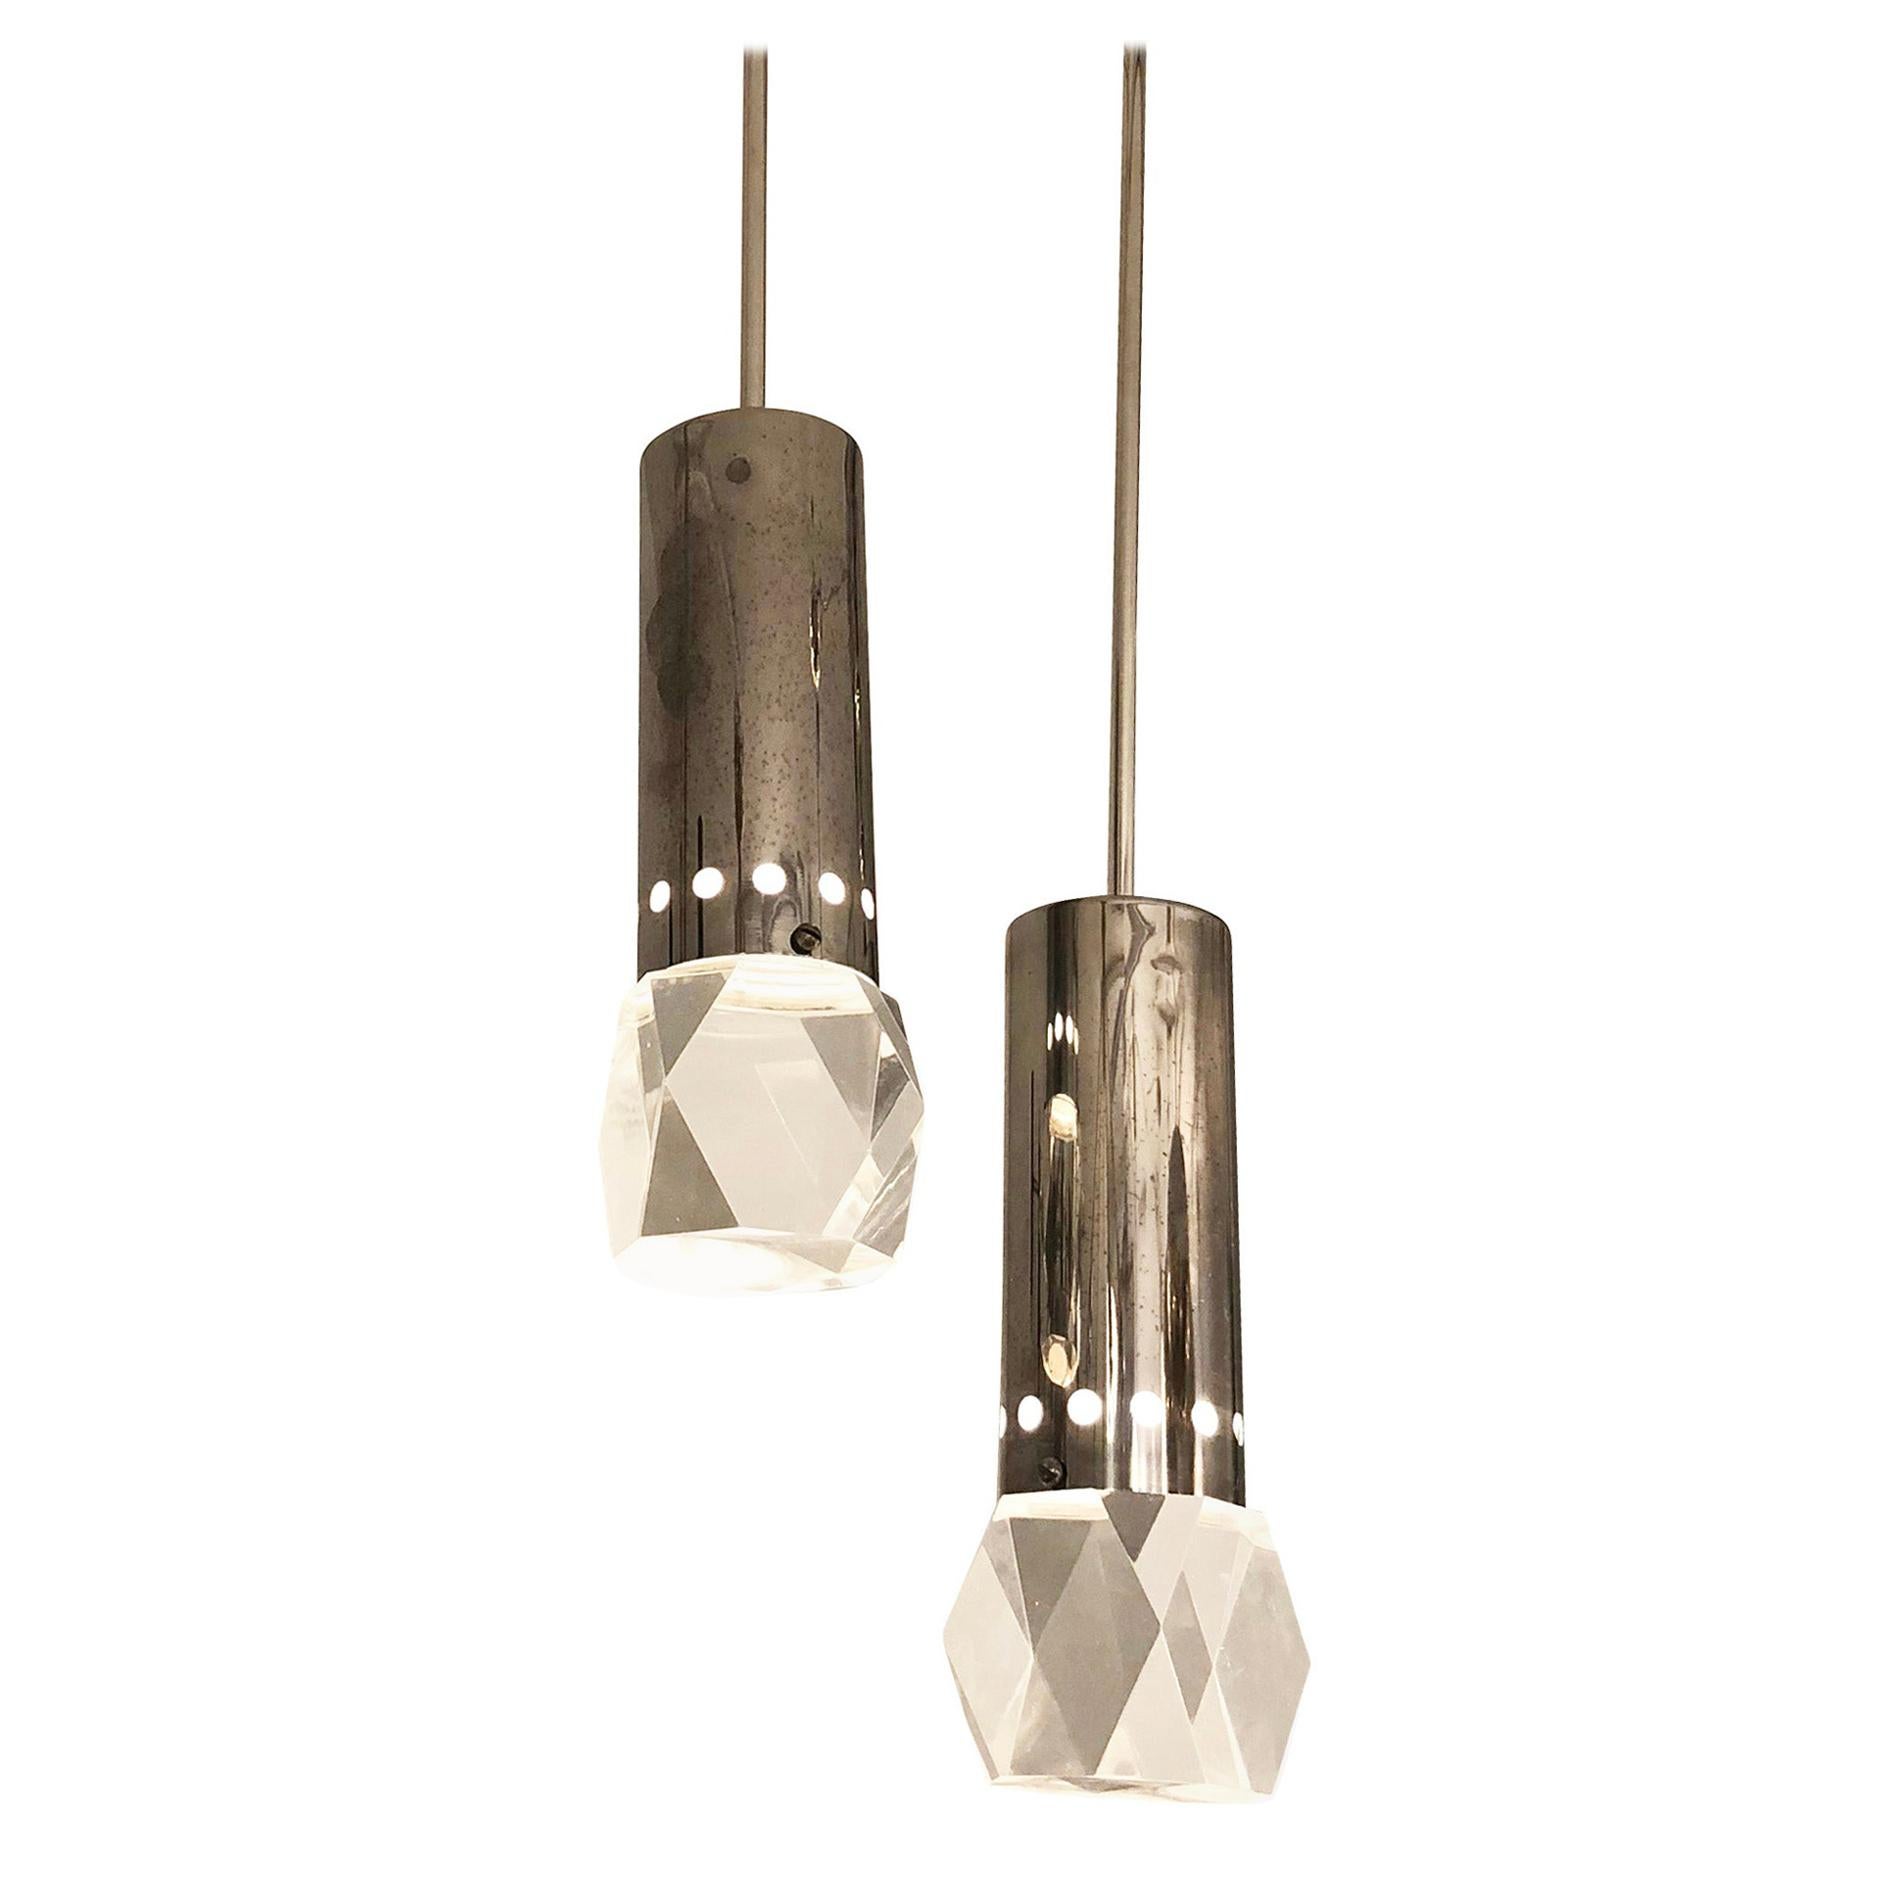 Pair of Stilnovo Pendants with Facted Lucite Shades